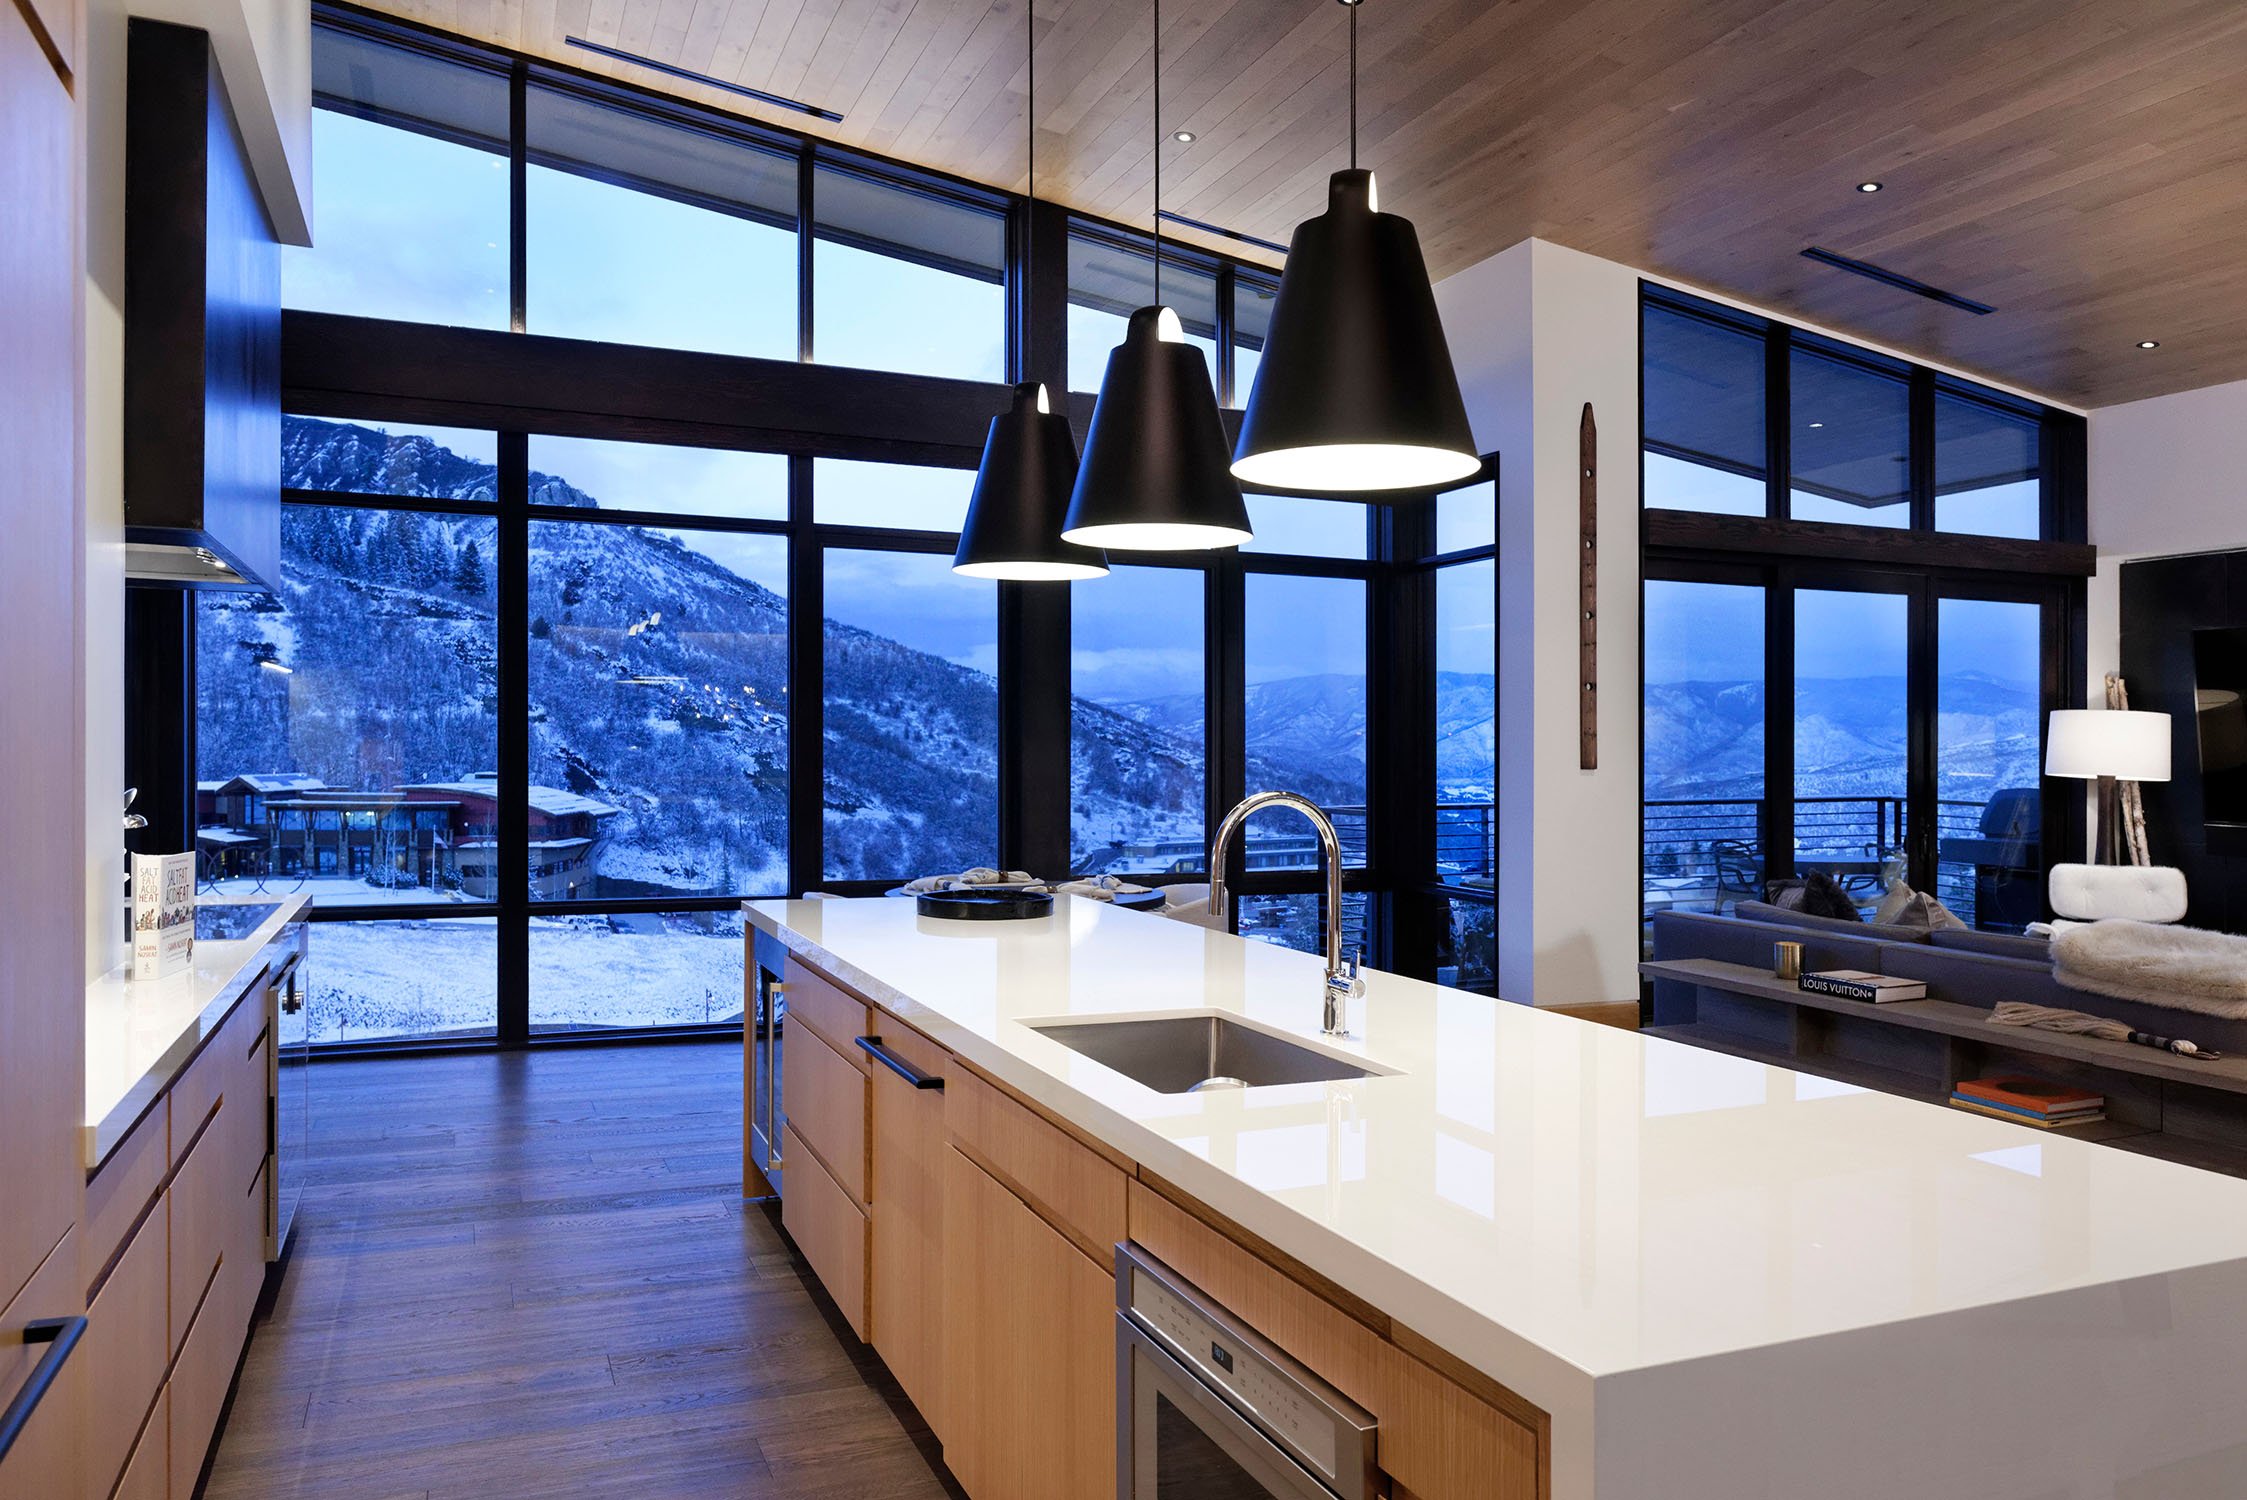 One Snowmass Kitchen View at Night